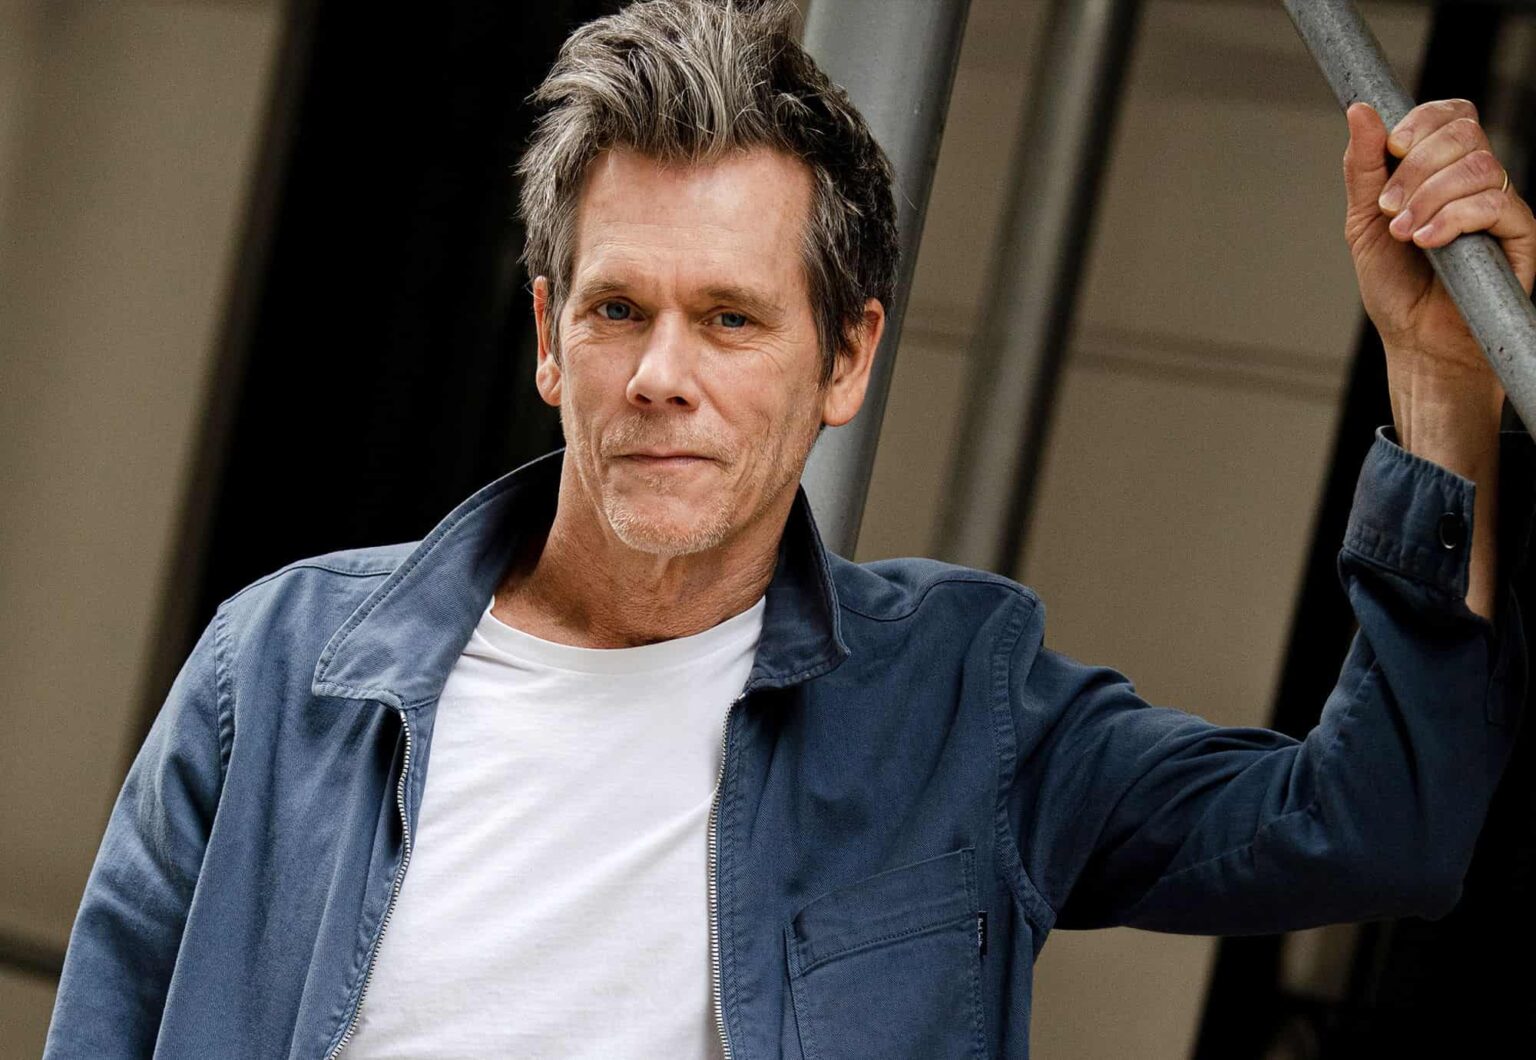 Kevin Bacon has had quite the career, but where should a noob start? Cut out the filler and jump into our list of the actor's most interesting movies.